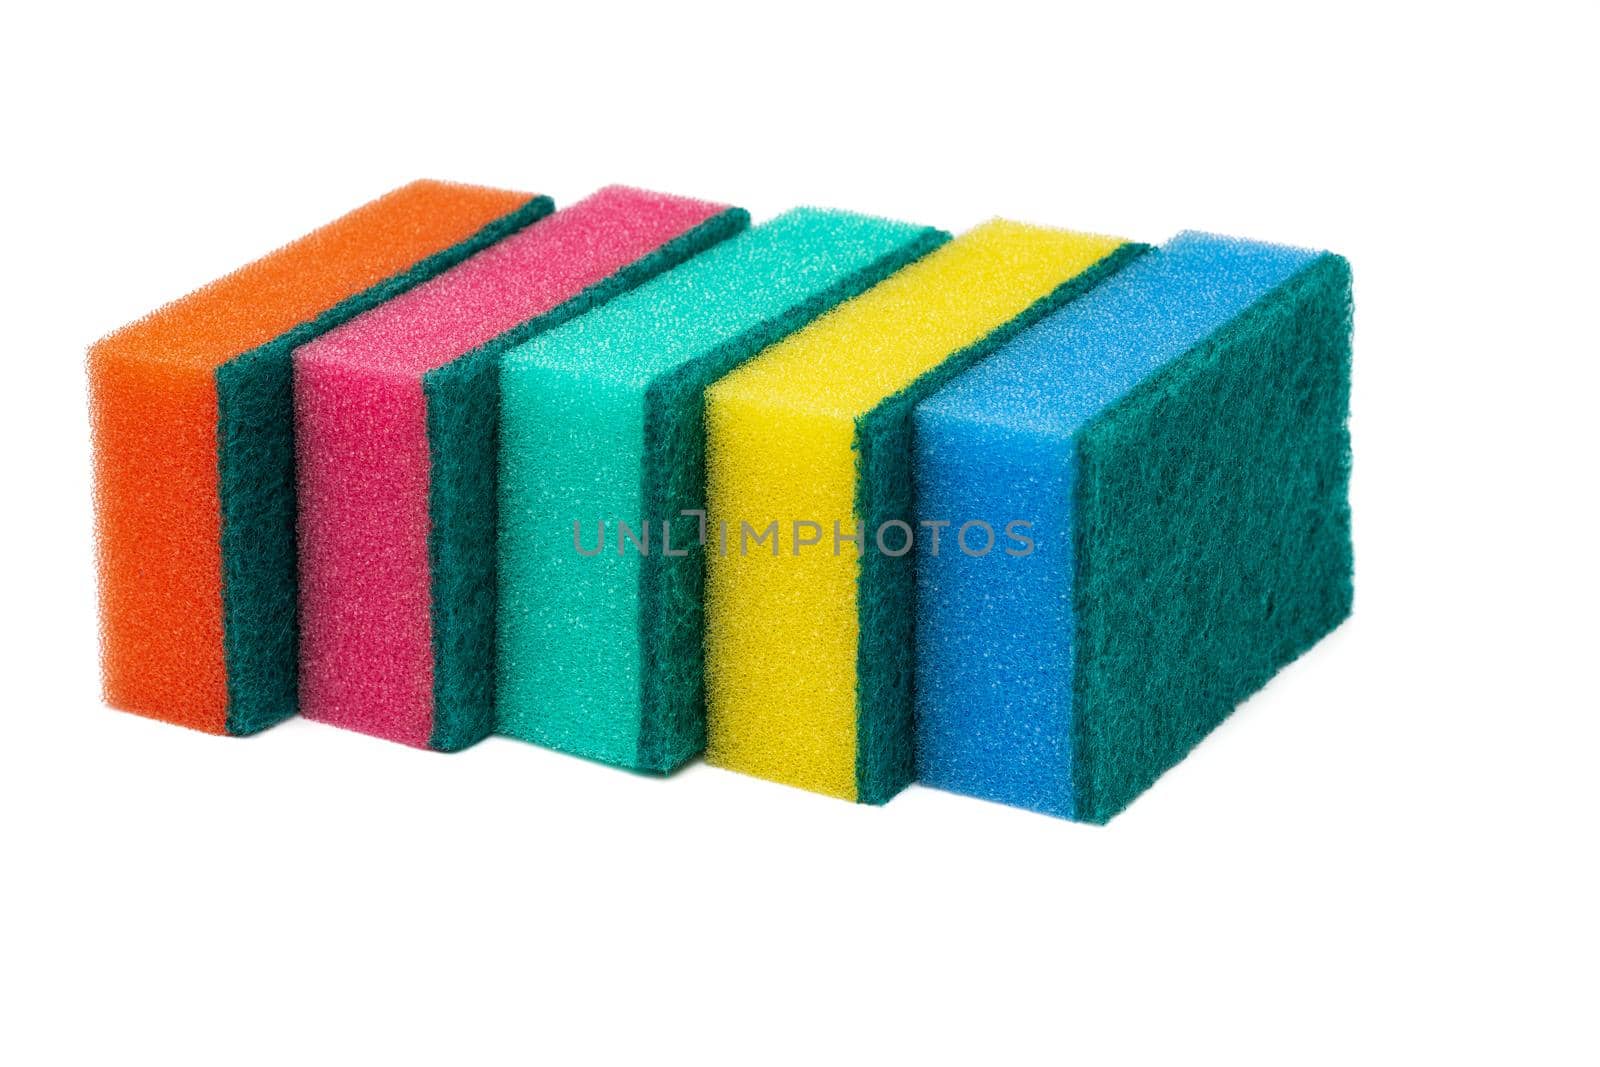 Group of foam sponges with abrasive material used by housewives who care about cleanliness in home by Alexander-Piragis